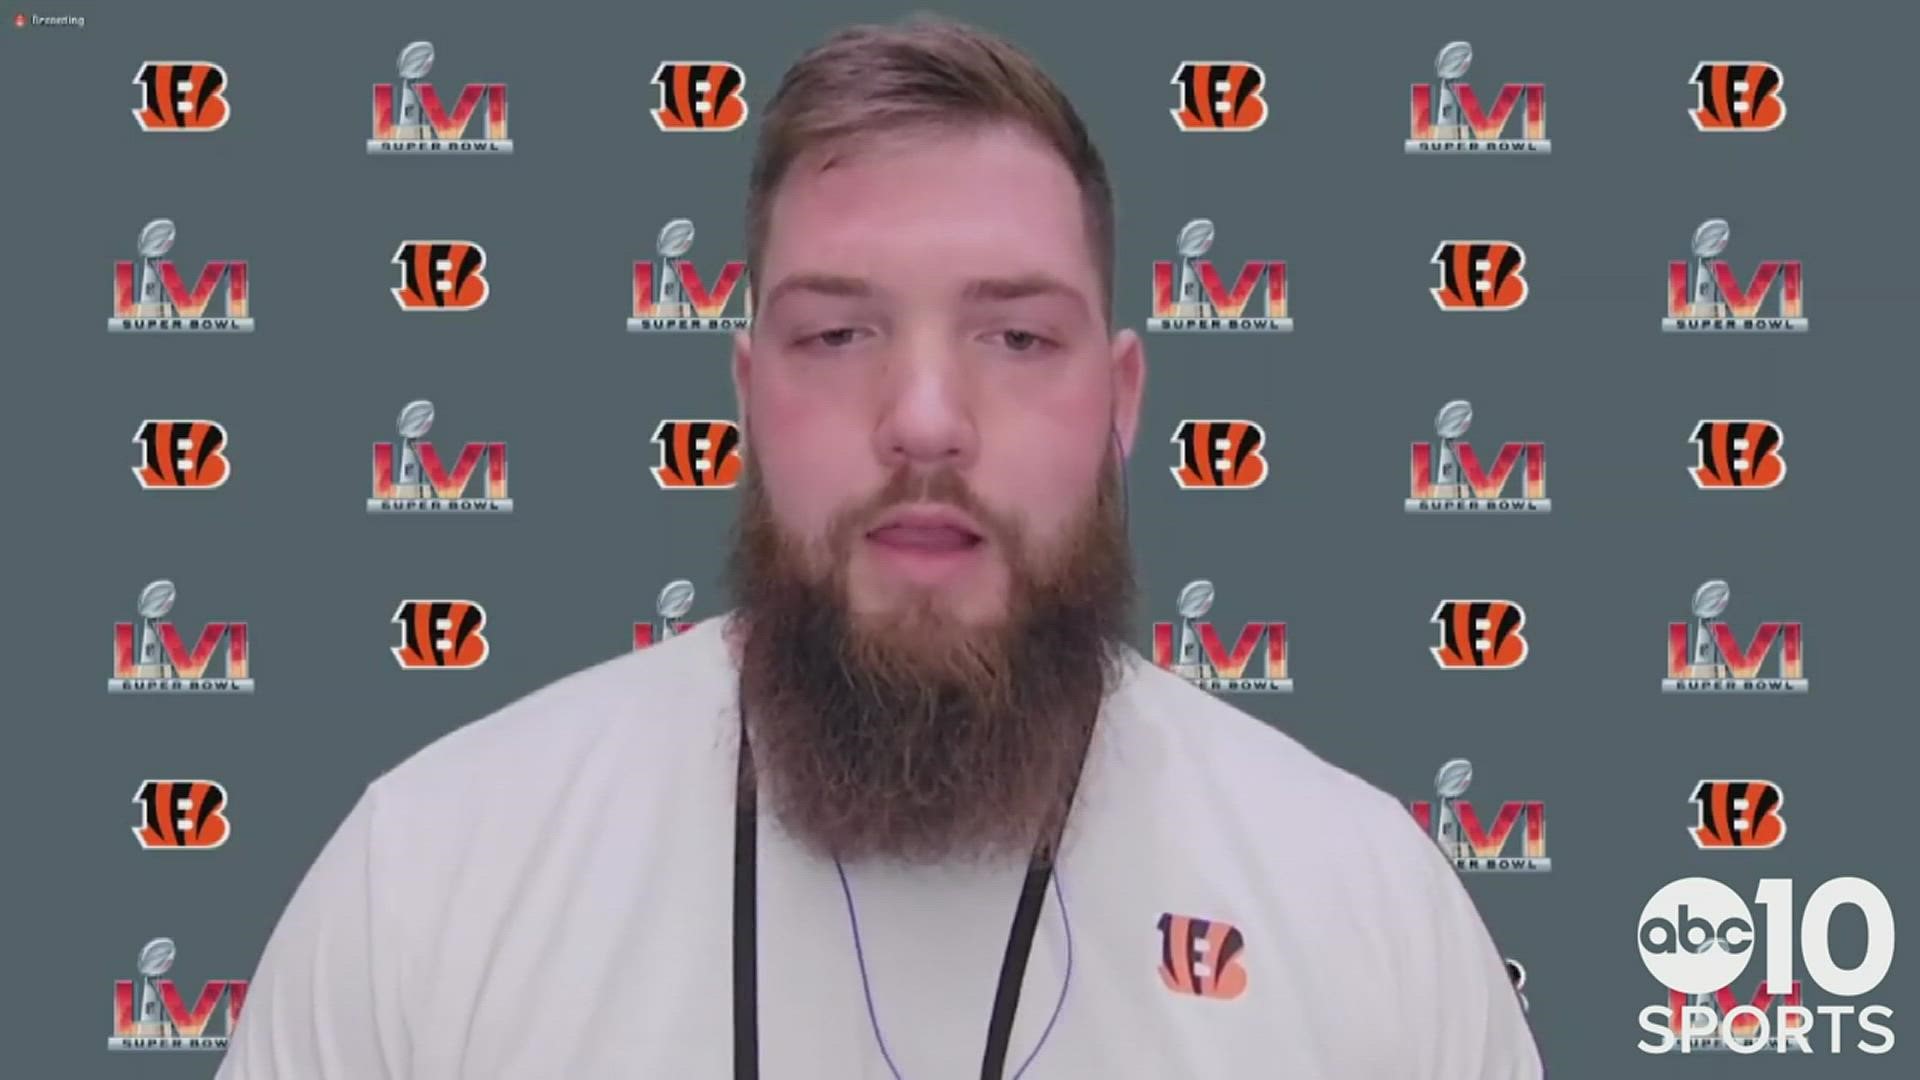 Cincinnati Bengals offensive tackle Jonah Williams, the former Folsom High School star, meets with the media prior to playing in his first Super Bowl.